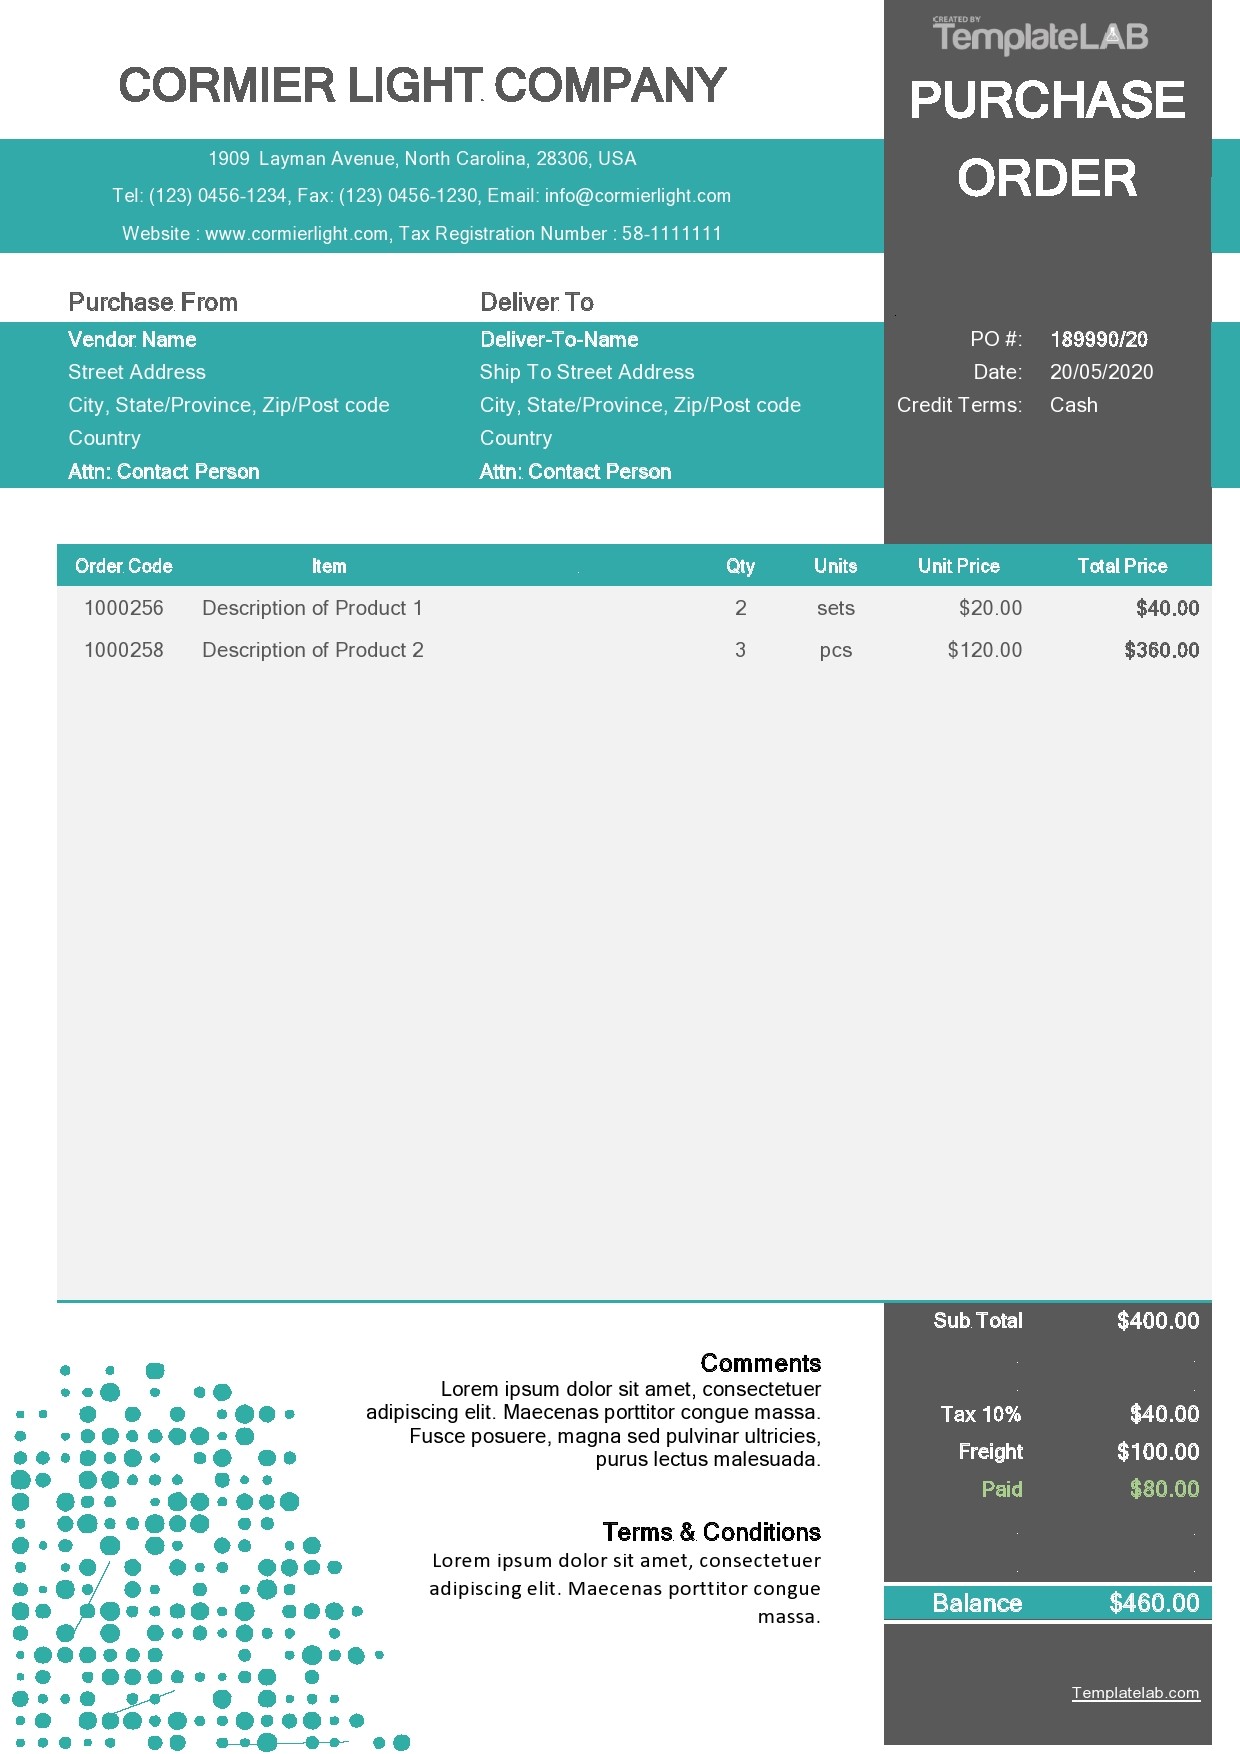 Free Purchase Order Template v2